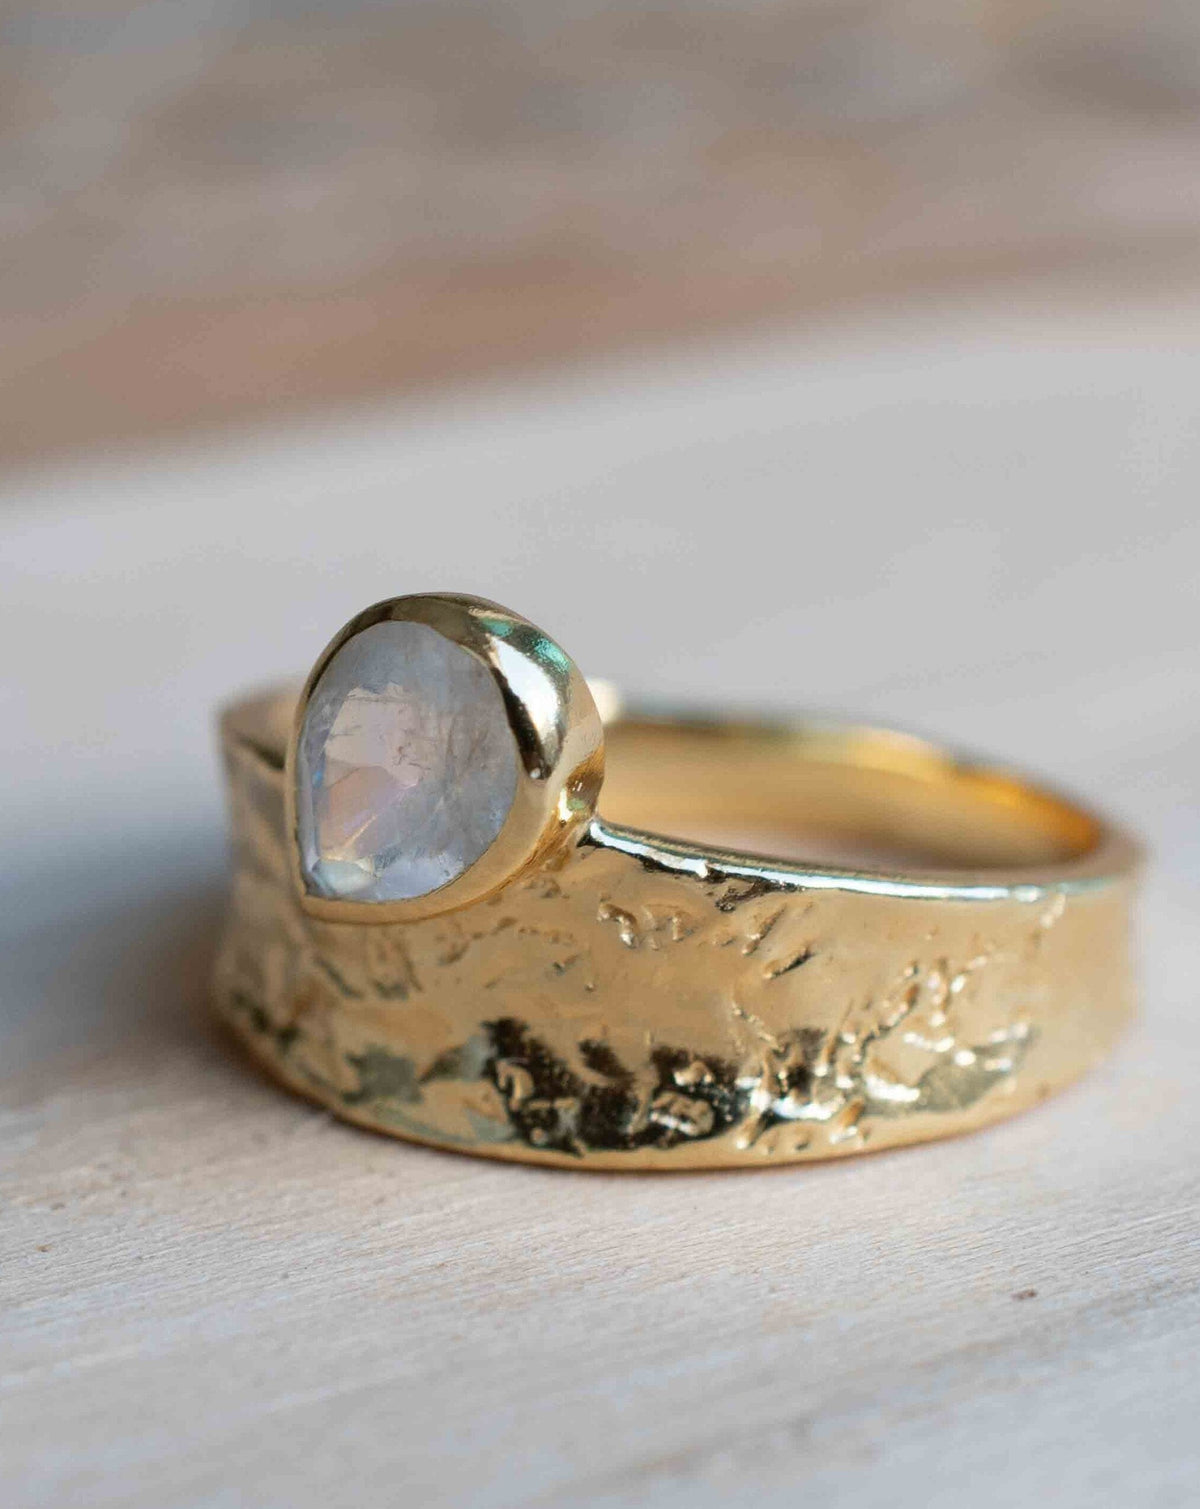 Moonstone Gold Plated Ring * Statement Ring * Gemstone Ring * Rainbow Moonstone * Gold Ring * Large Ring Statement * BJR289